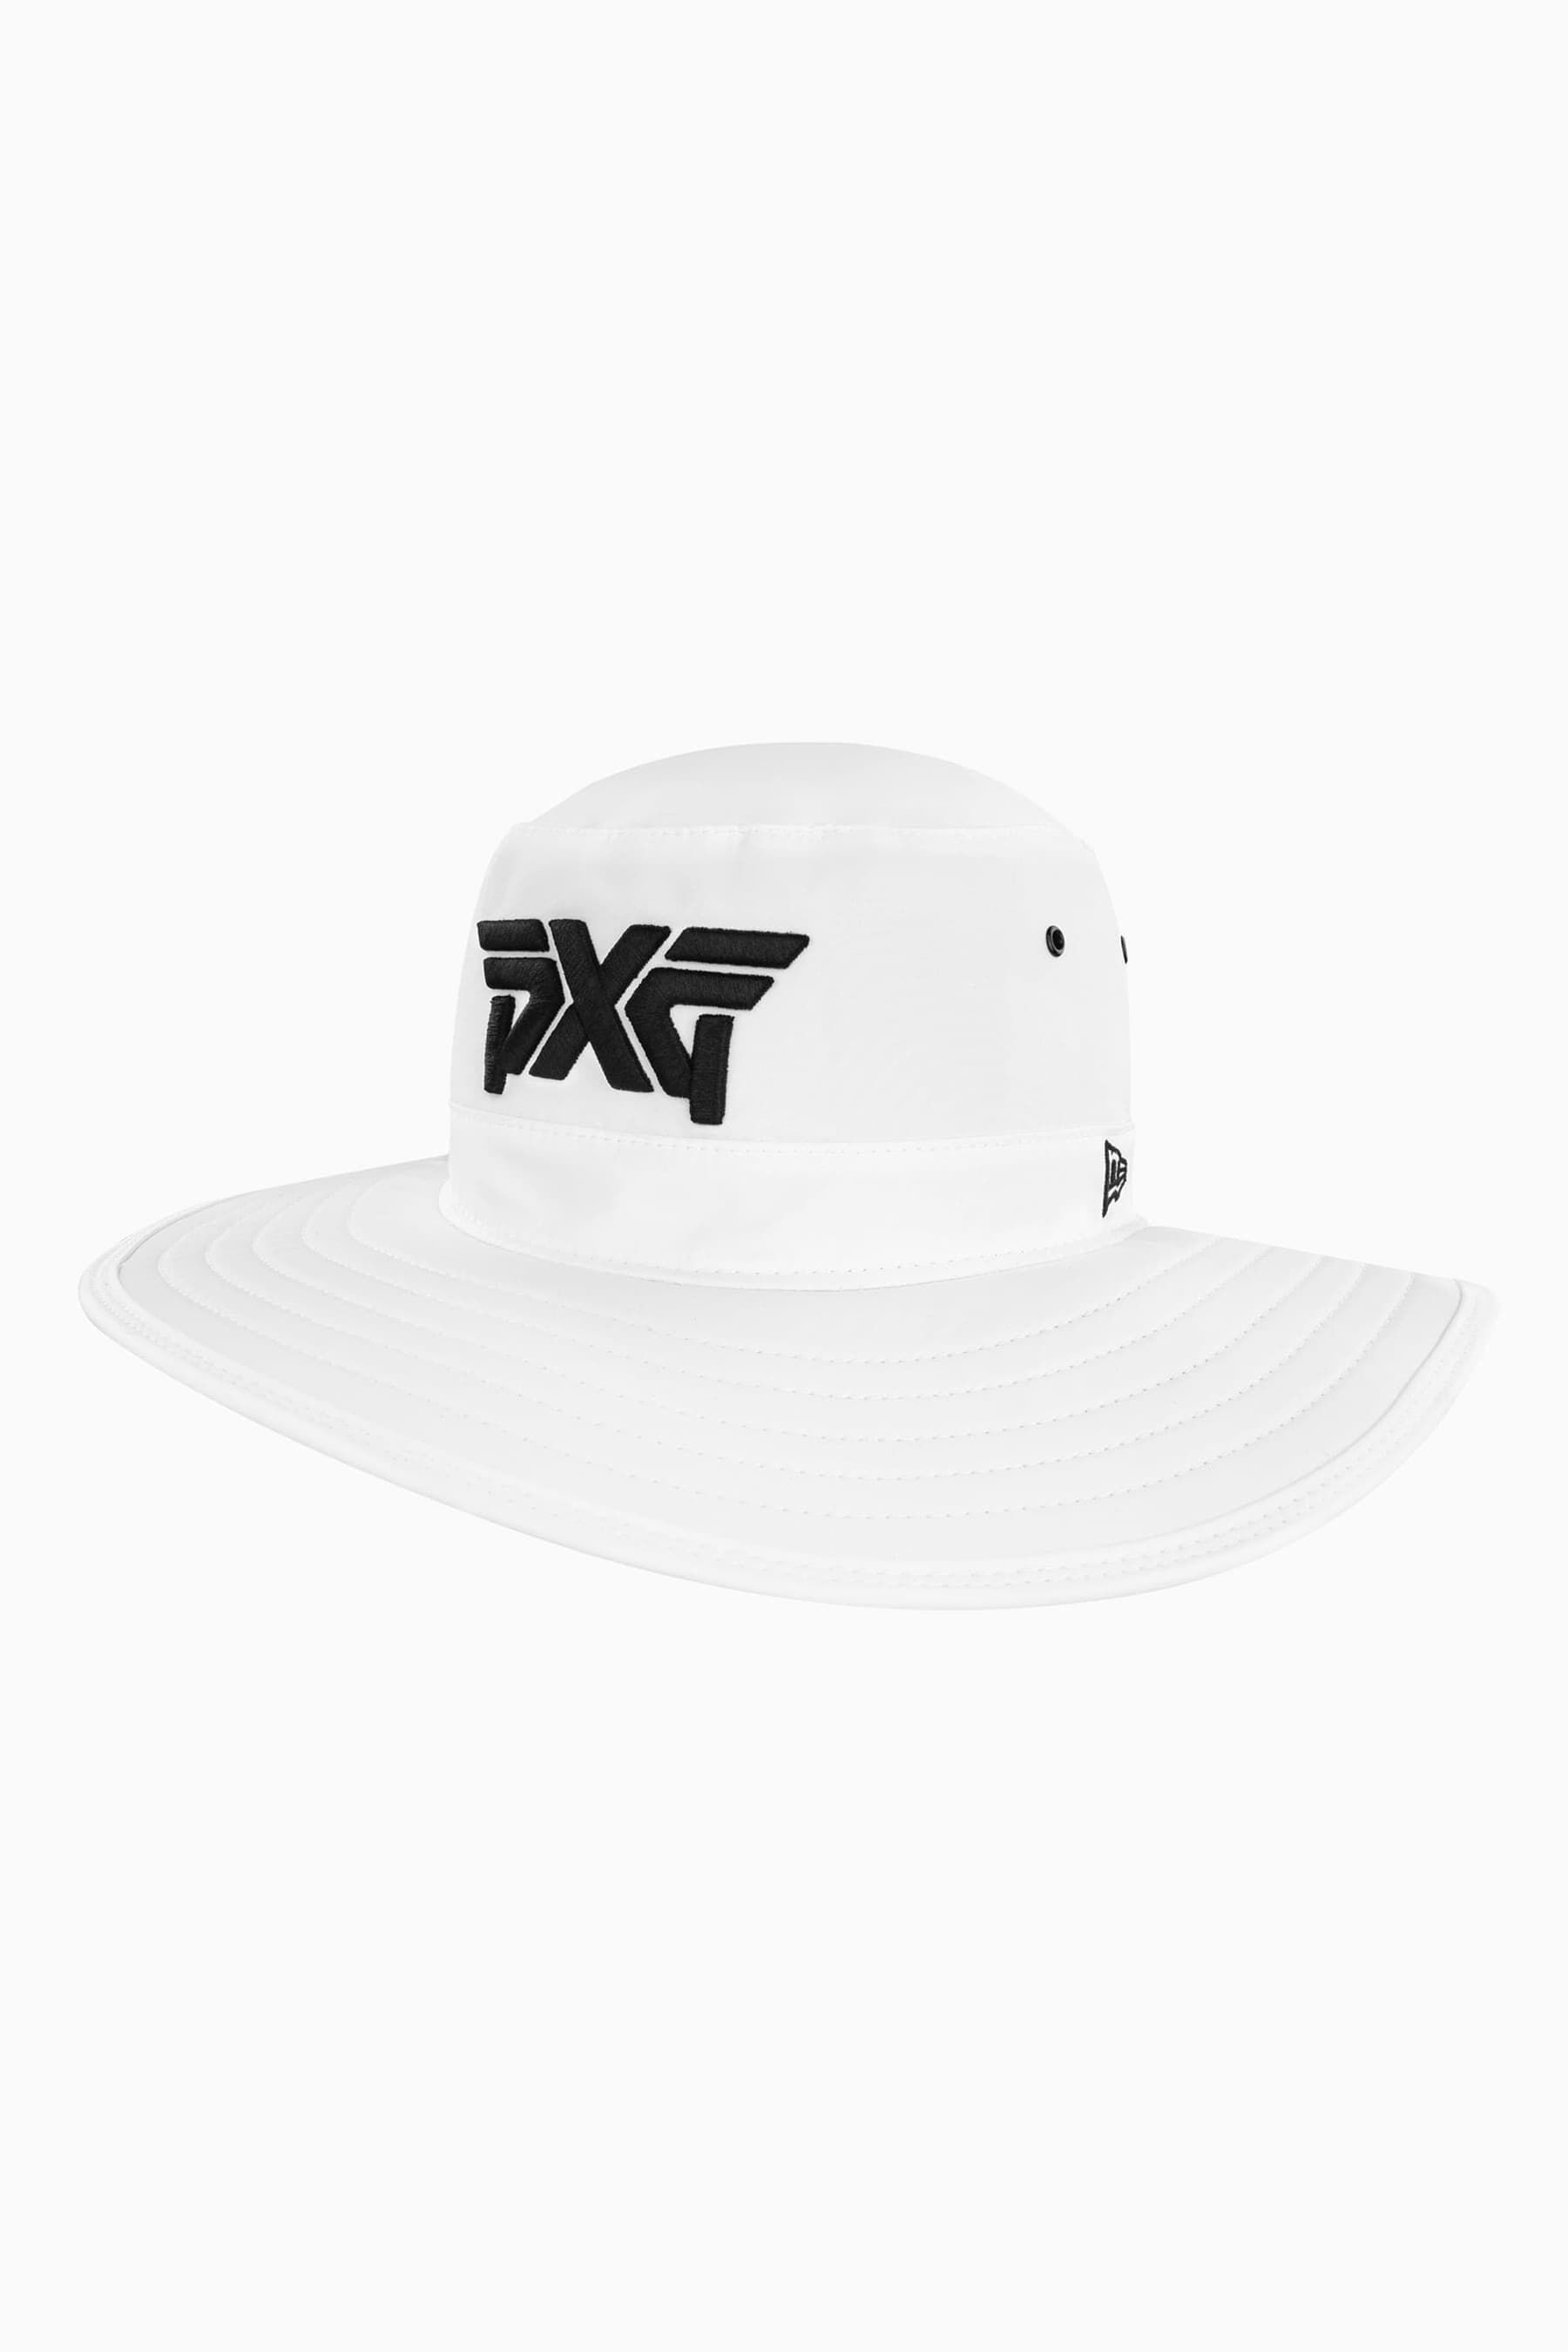 Shop PXG Golf バケットハット - Caps, Visors, Beanies and More | PXG JP